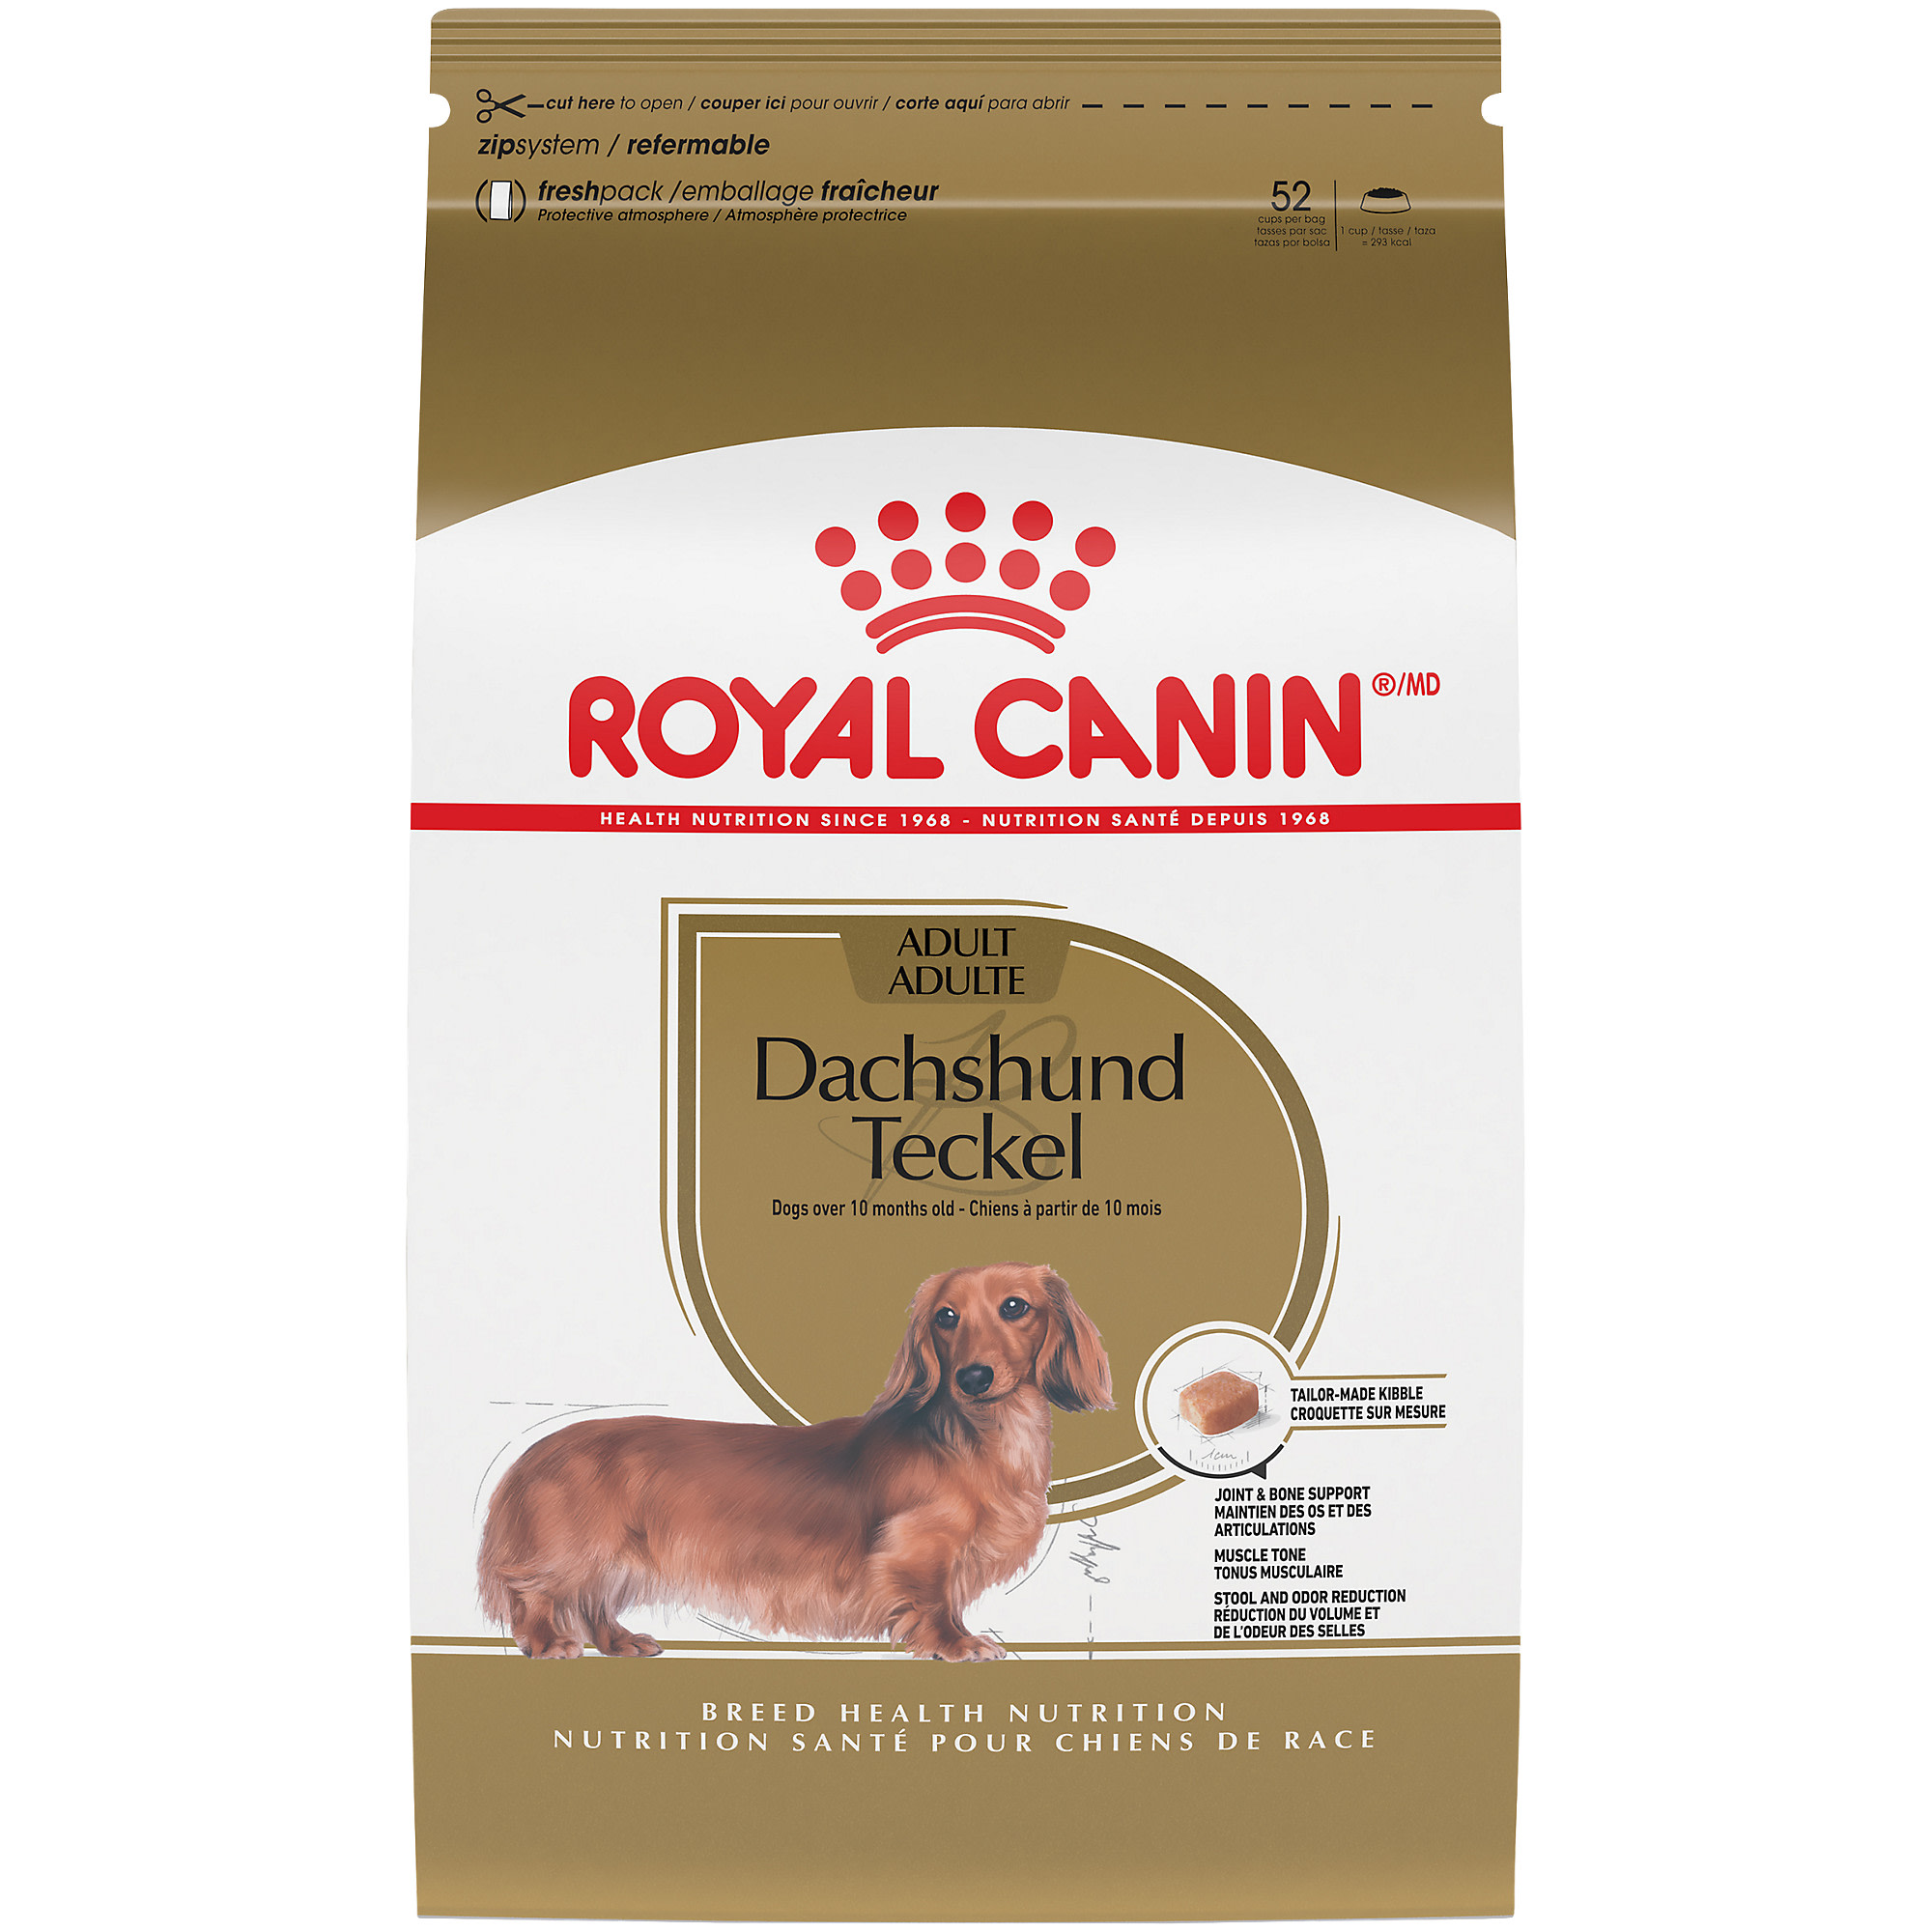 best joint supplement for dachshunds